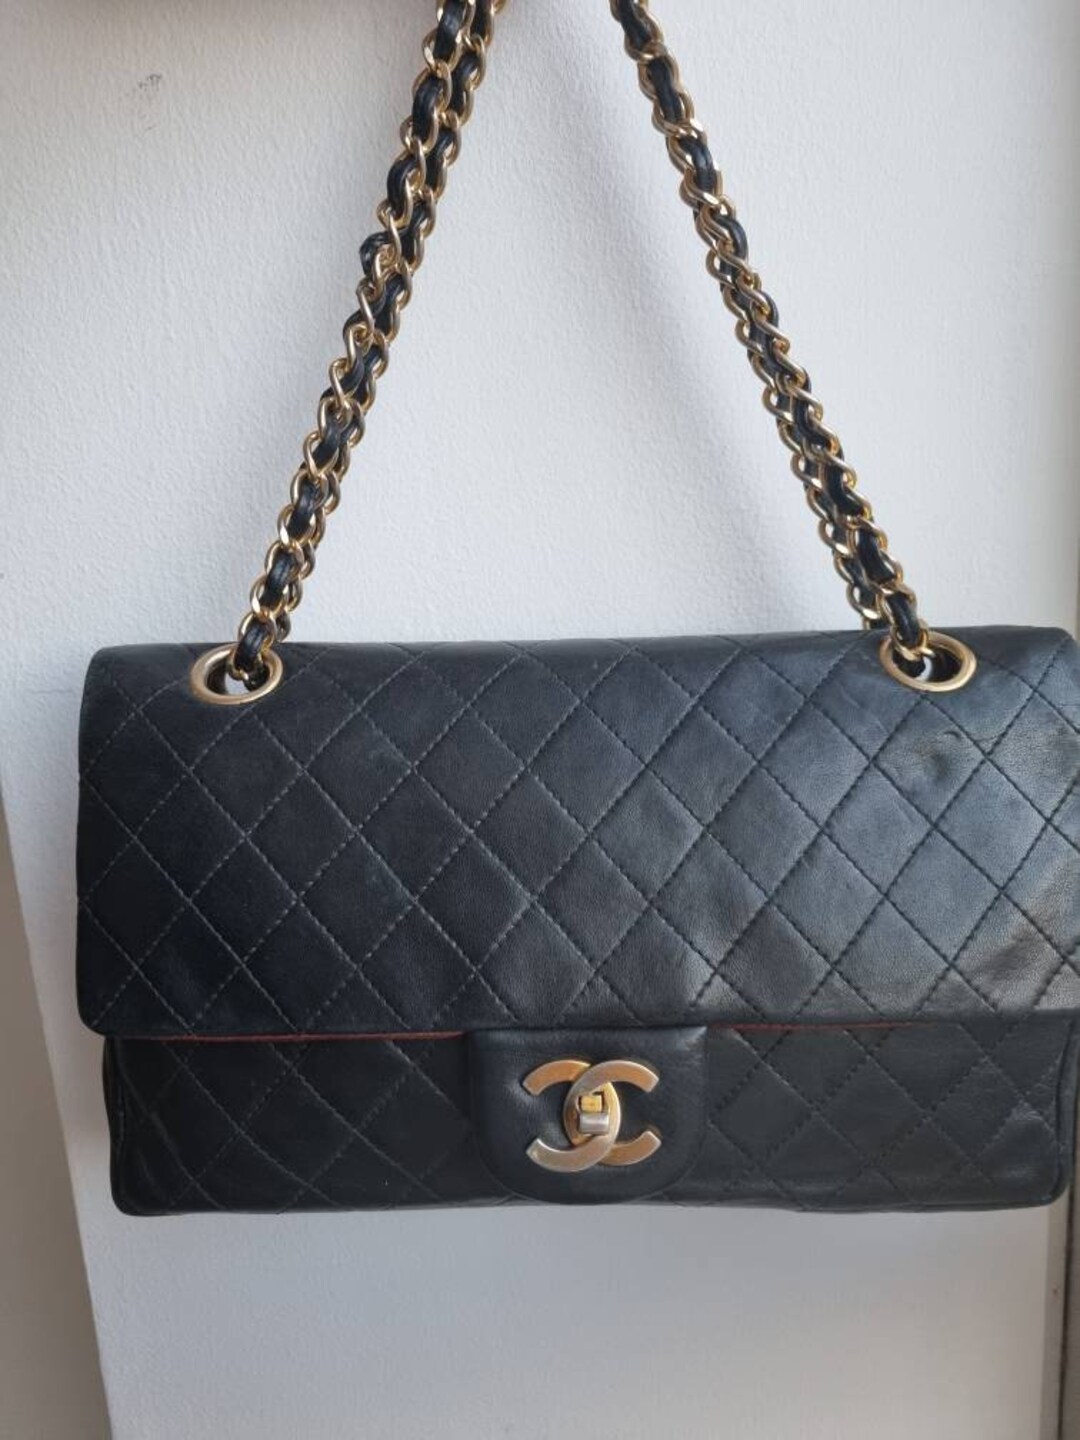 Any vintage Chanel experts here? For this Vintage one from 1970s